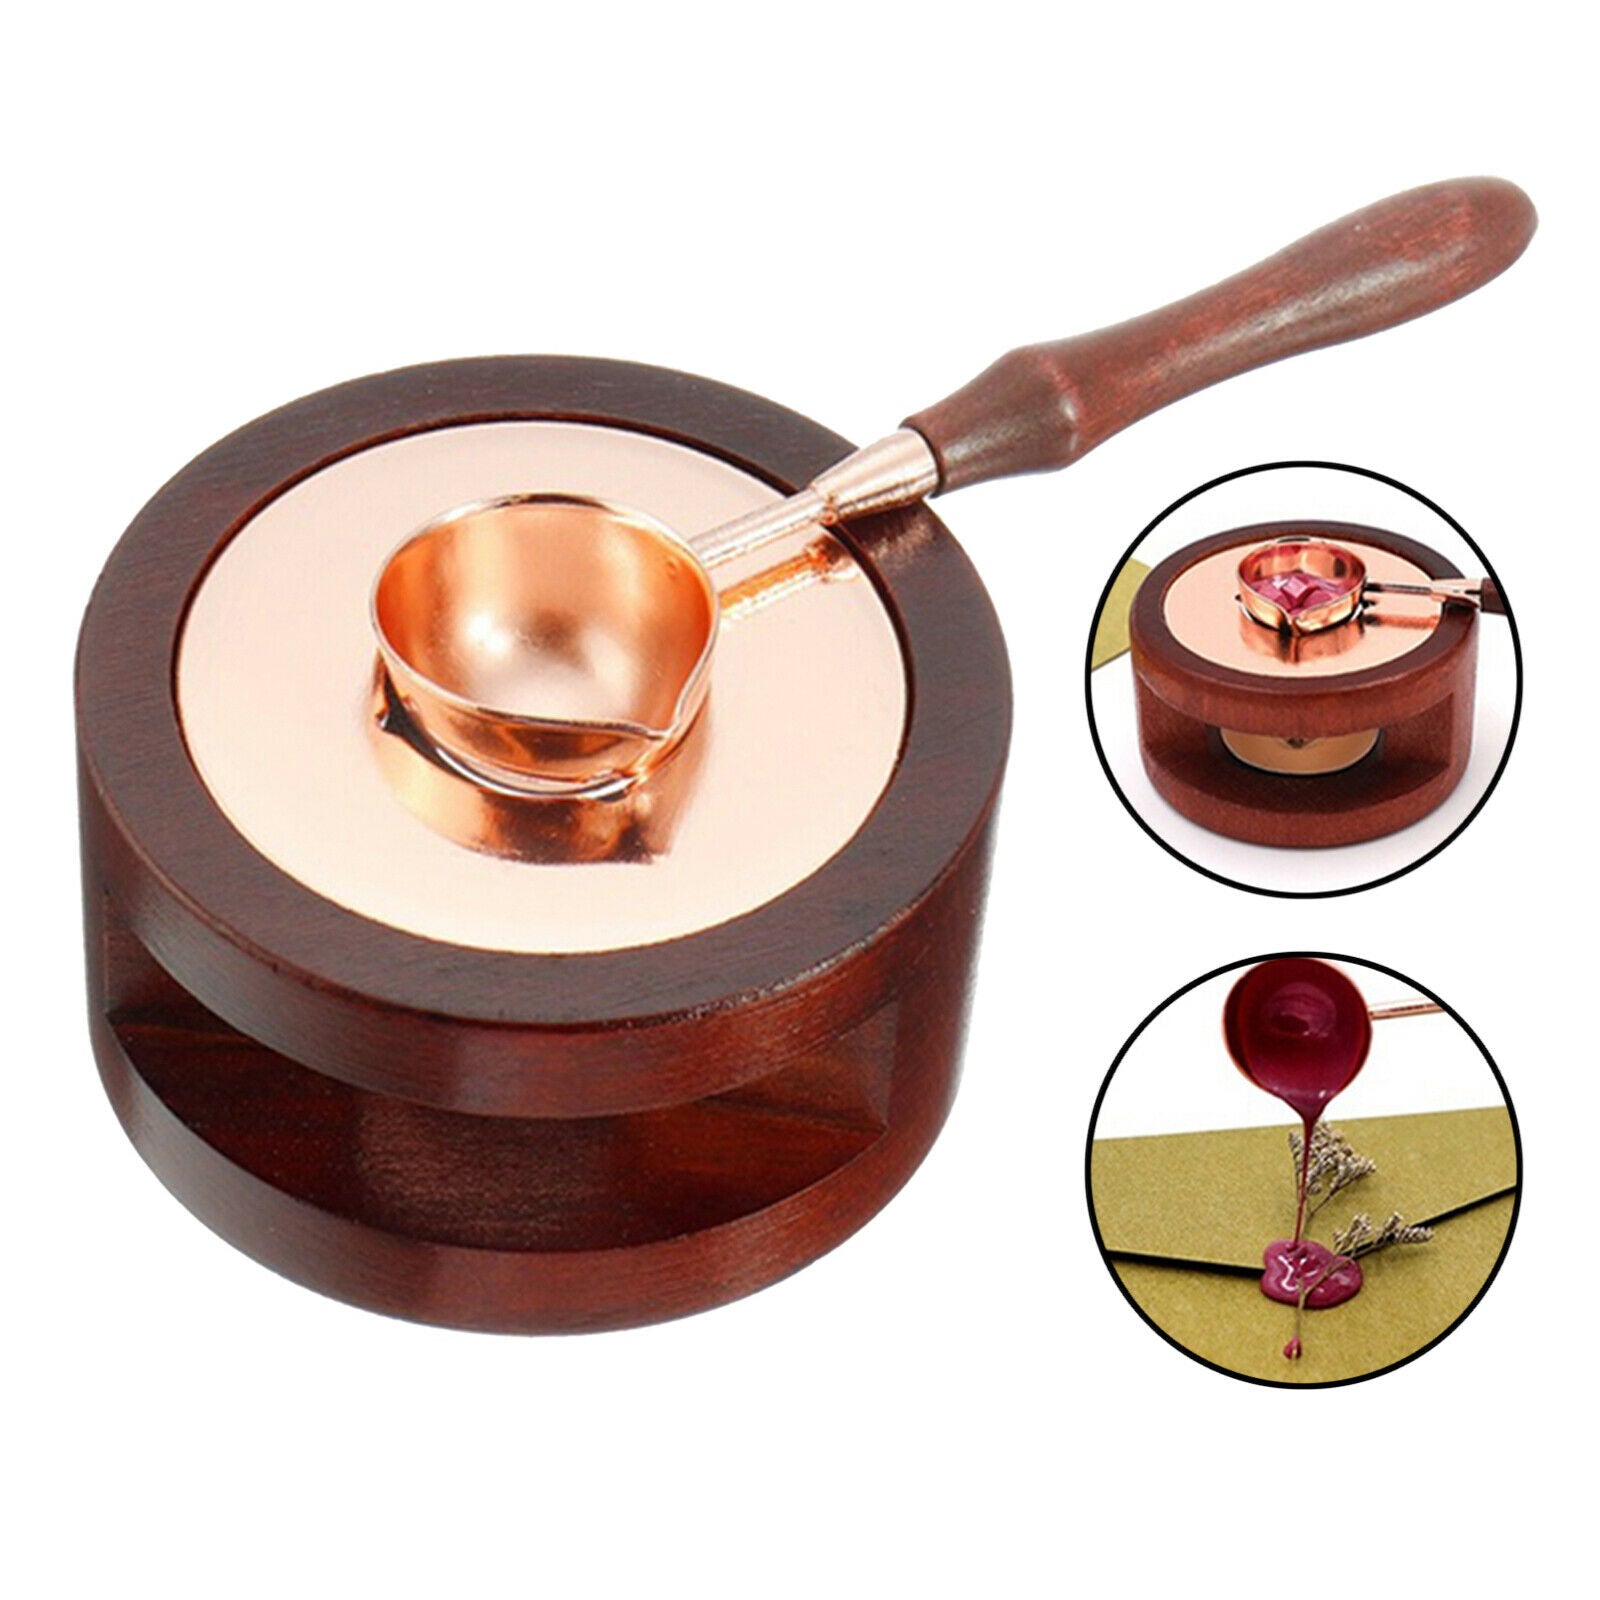 Melting Furnace Tool Wax Seal Furnace Stove with Melting Spoon Kits for Wax